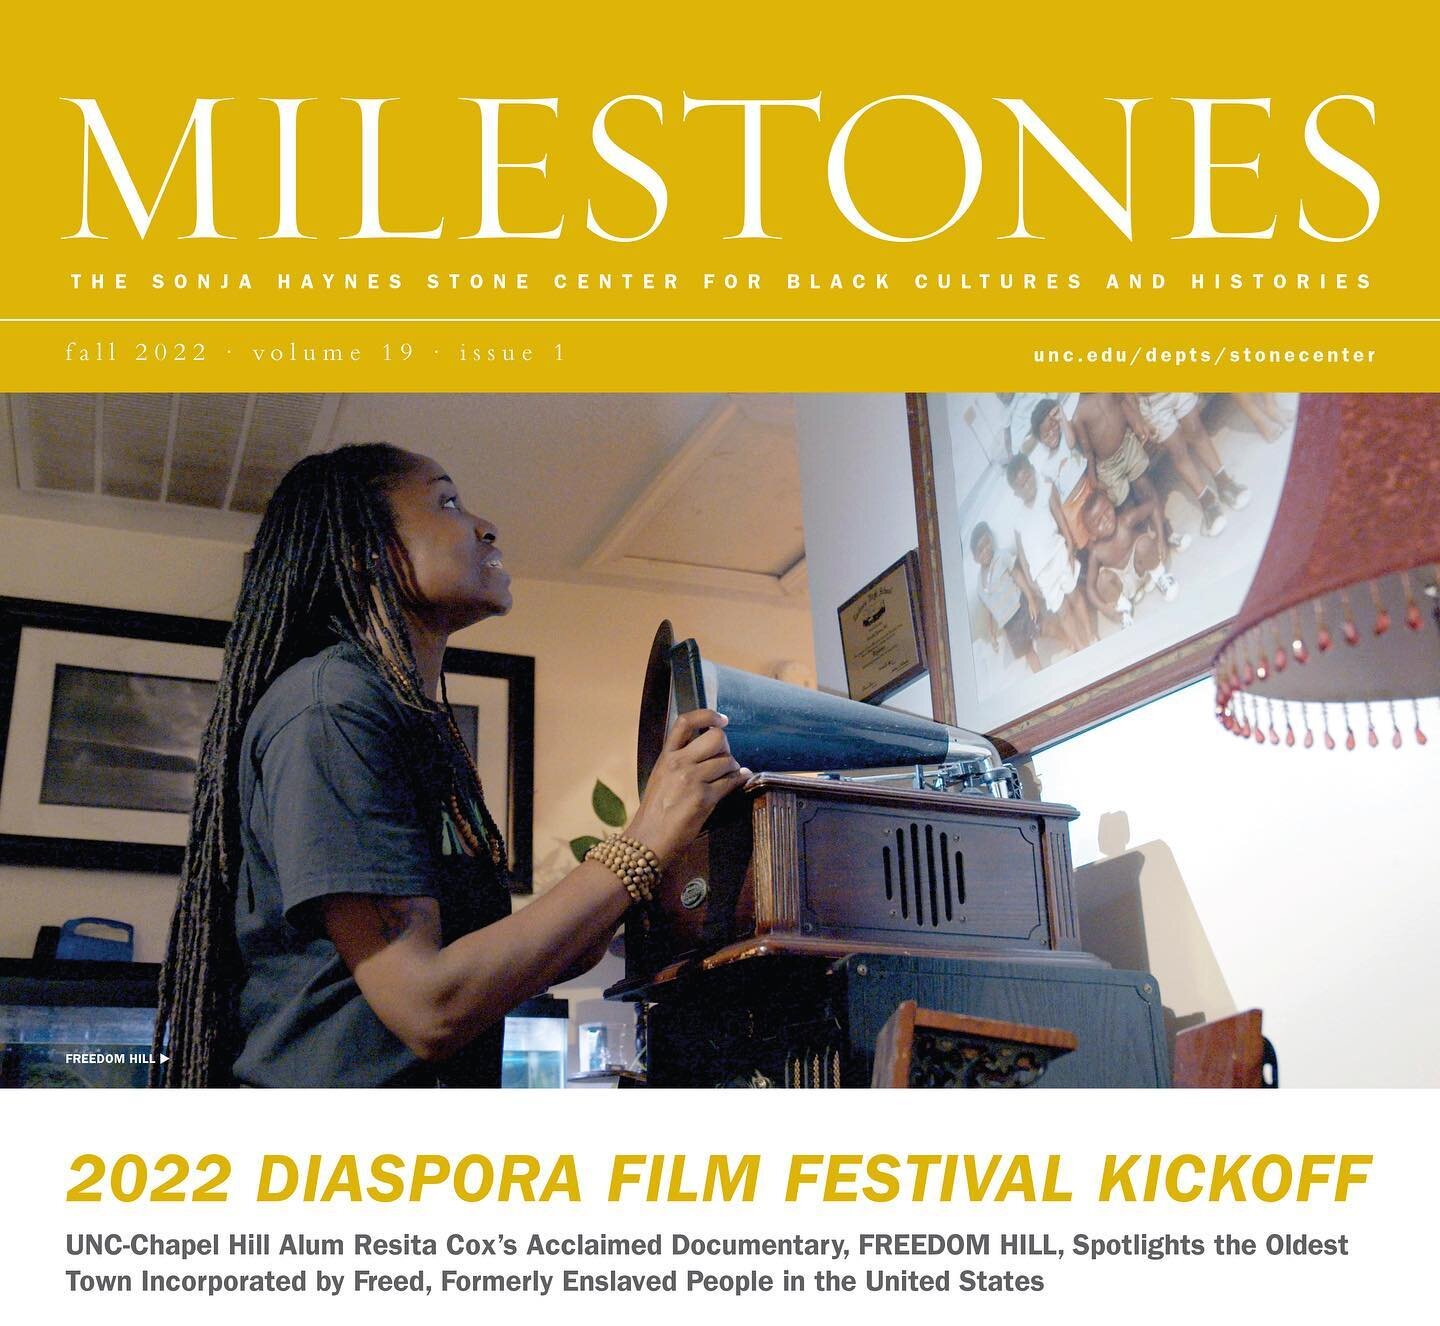 Two days away! @FreedomHillDoc is screening at Diapsora Film Festival on September 29 at 6 PM.

Get your tickets today. Click the link in our bio to learn more.  #FreedomHillDoc